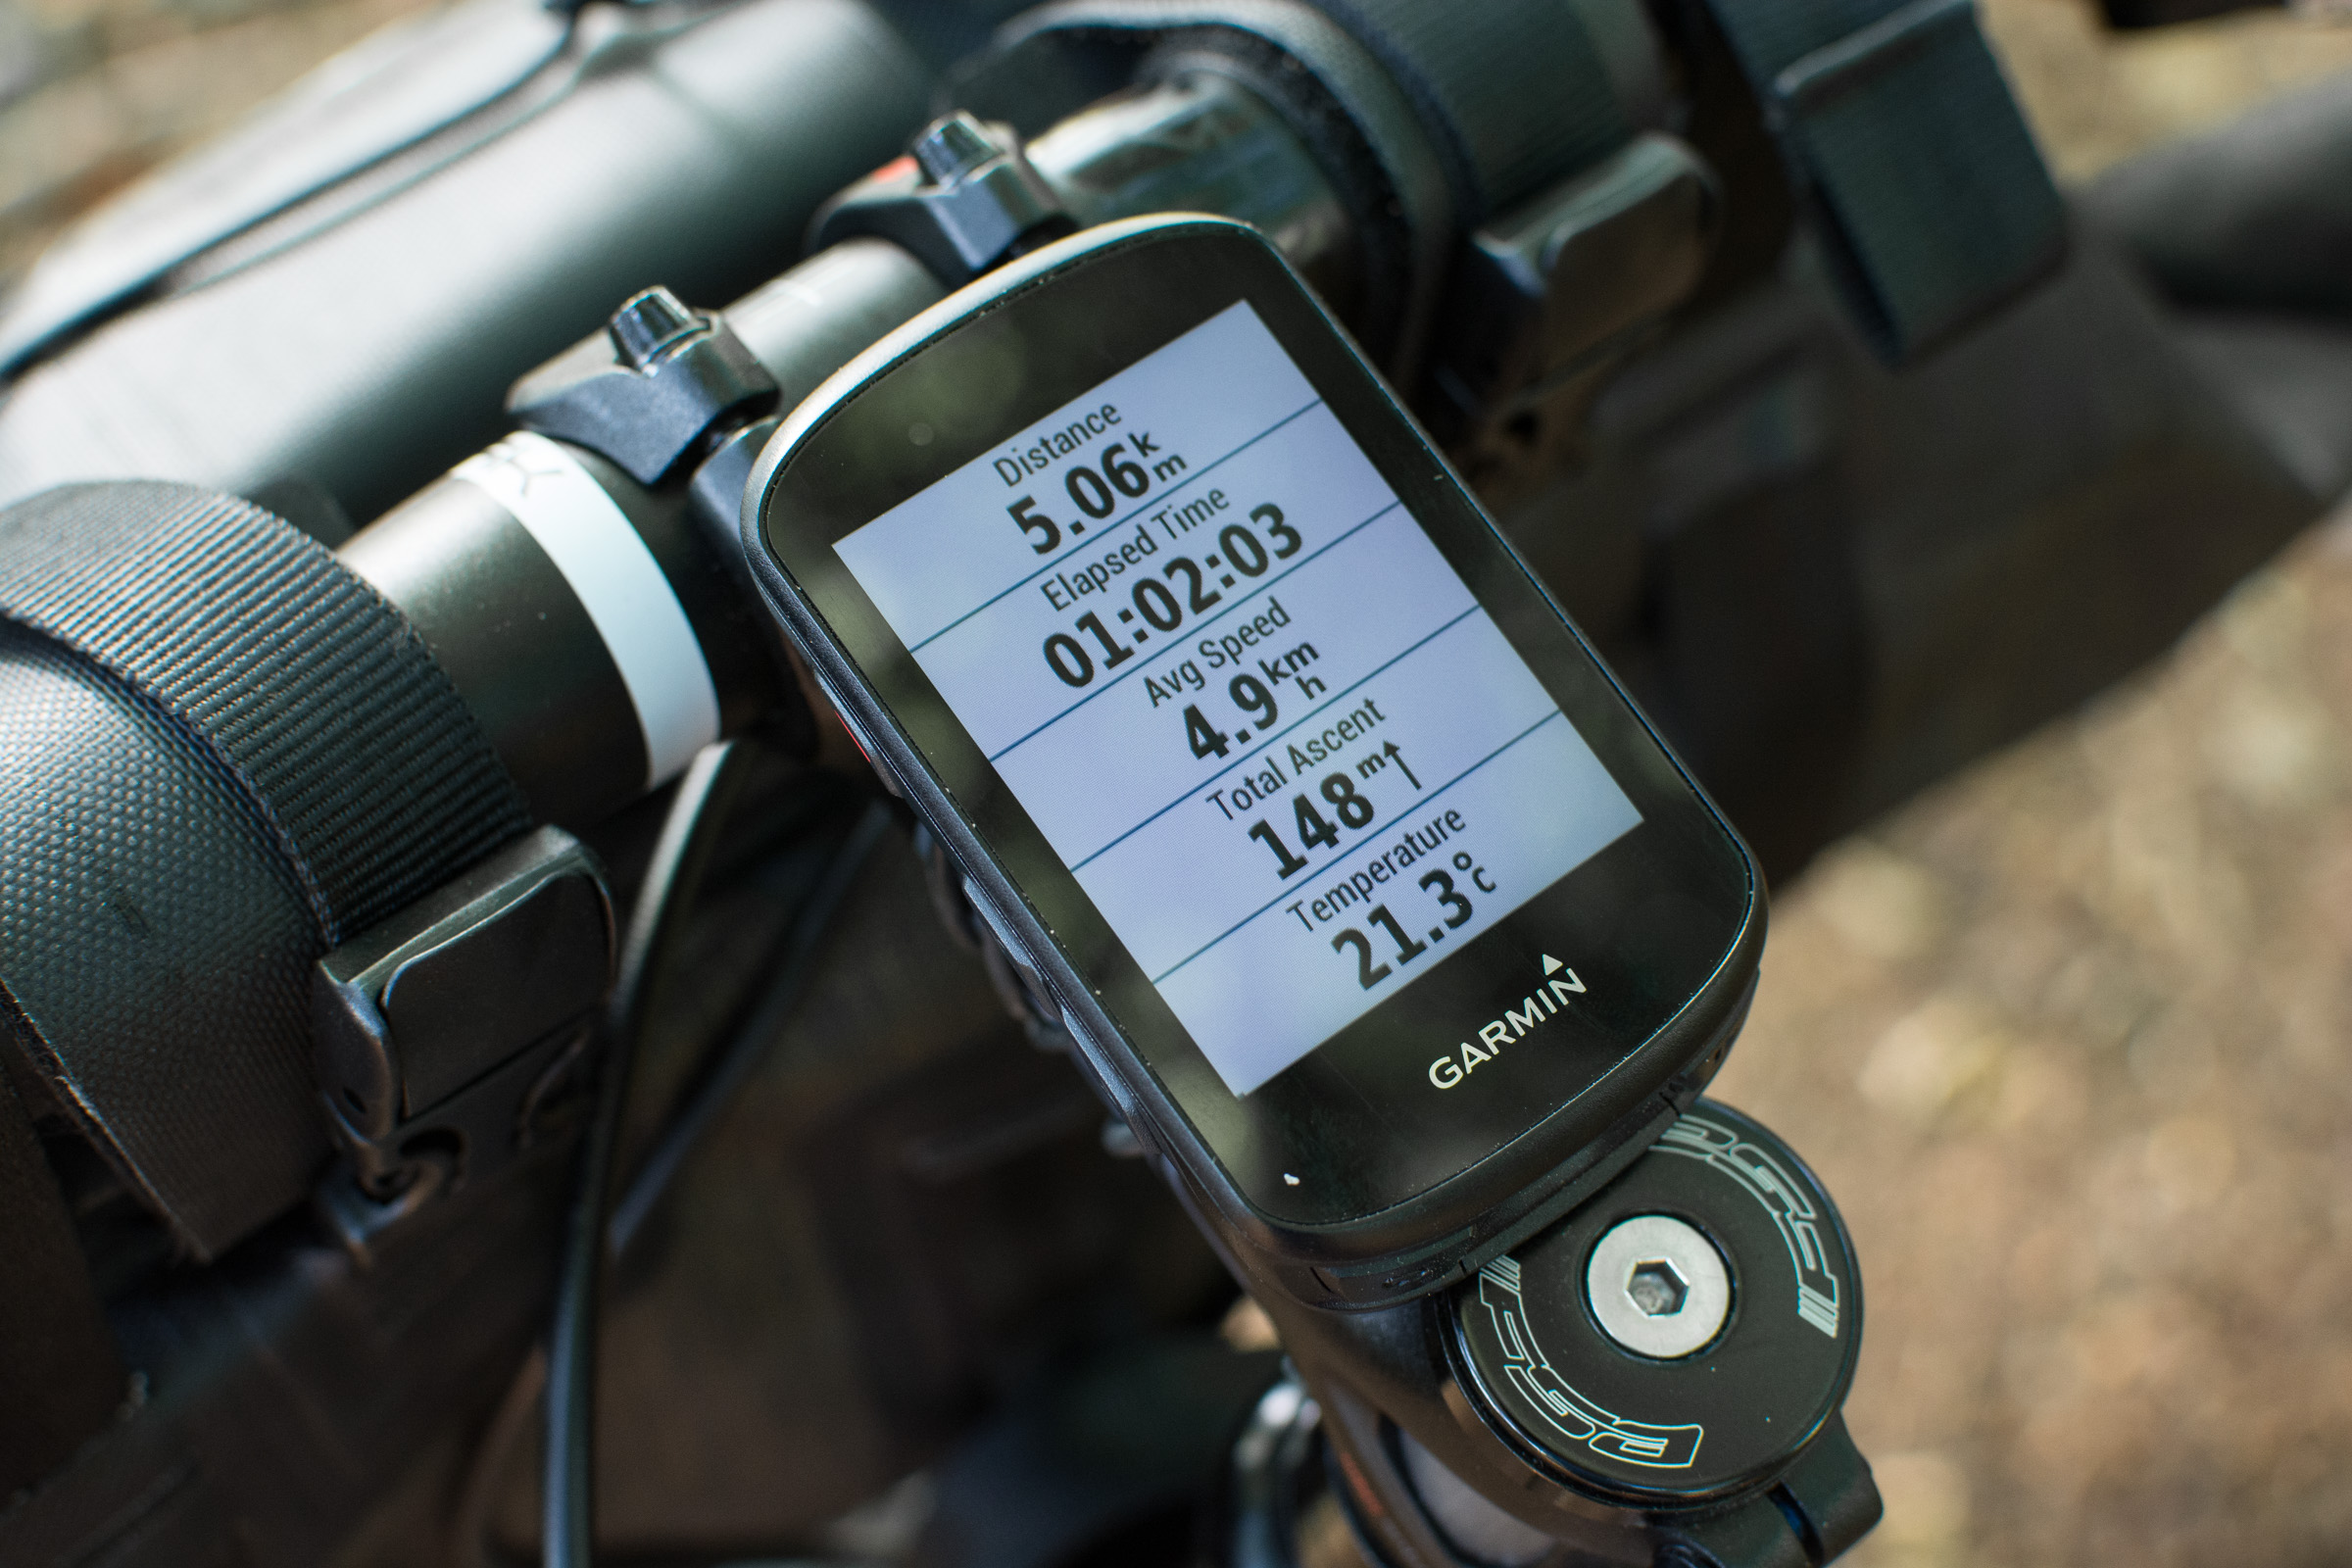 Garmin Edge 530 and Varia RTL510 review: Keeping your bike commute safe and  enhancing your outdoor fun